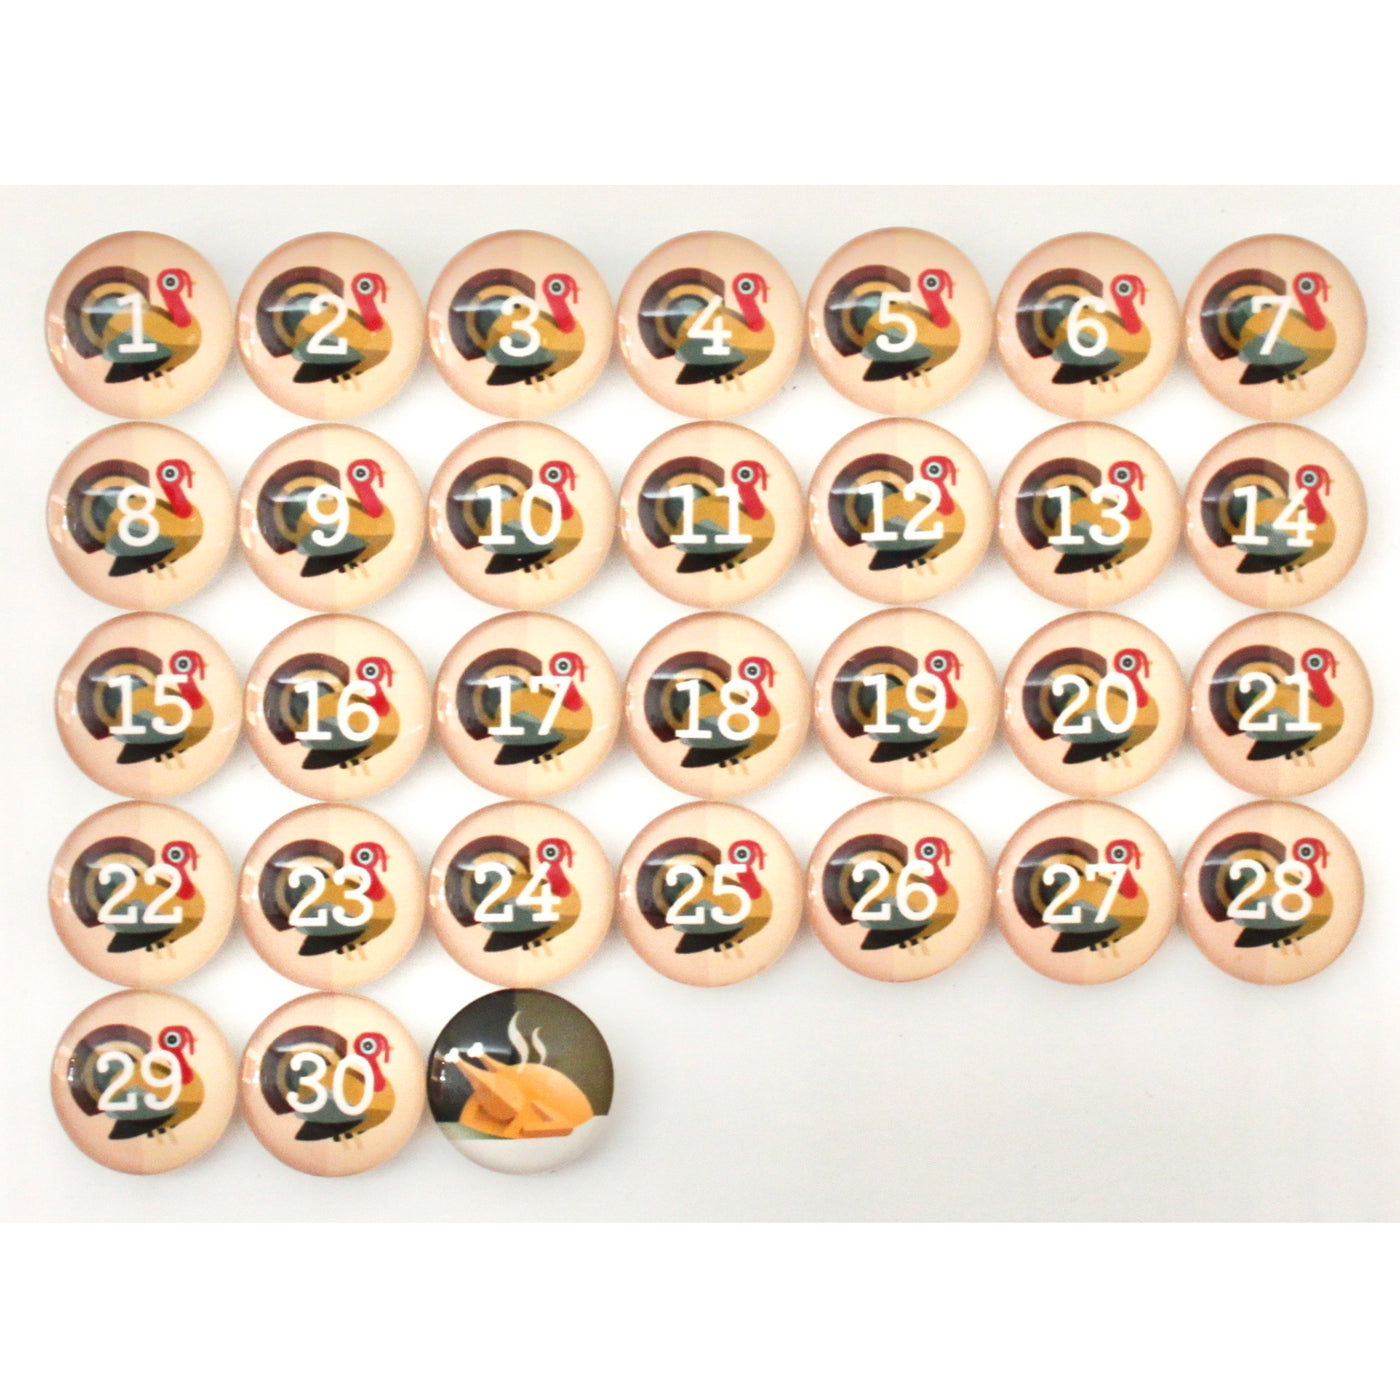 Number Magnets - Thanksgiving! Turkey Day